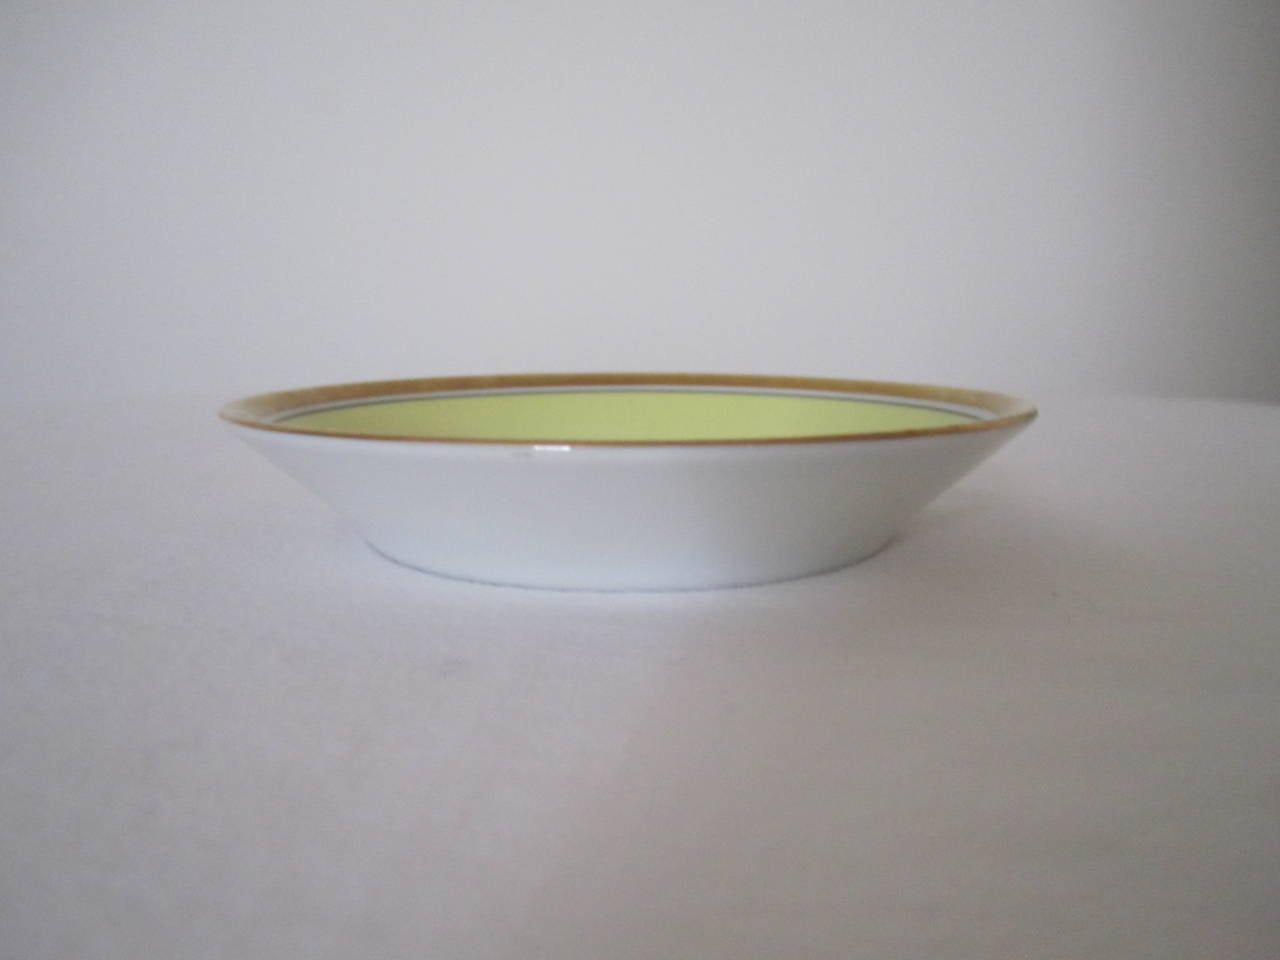 Mid-Century Italian dish or plate by desinger Richard Ginori with decorative urn detail. Colors include yellow, gold, white and black. With maker's mark on back as show in image #3. This small dish or plate can serve as a nice piece to hold jewelry